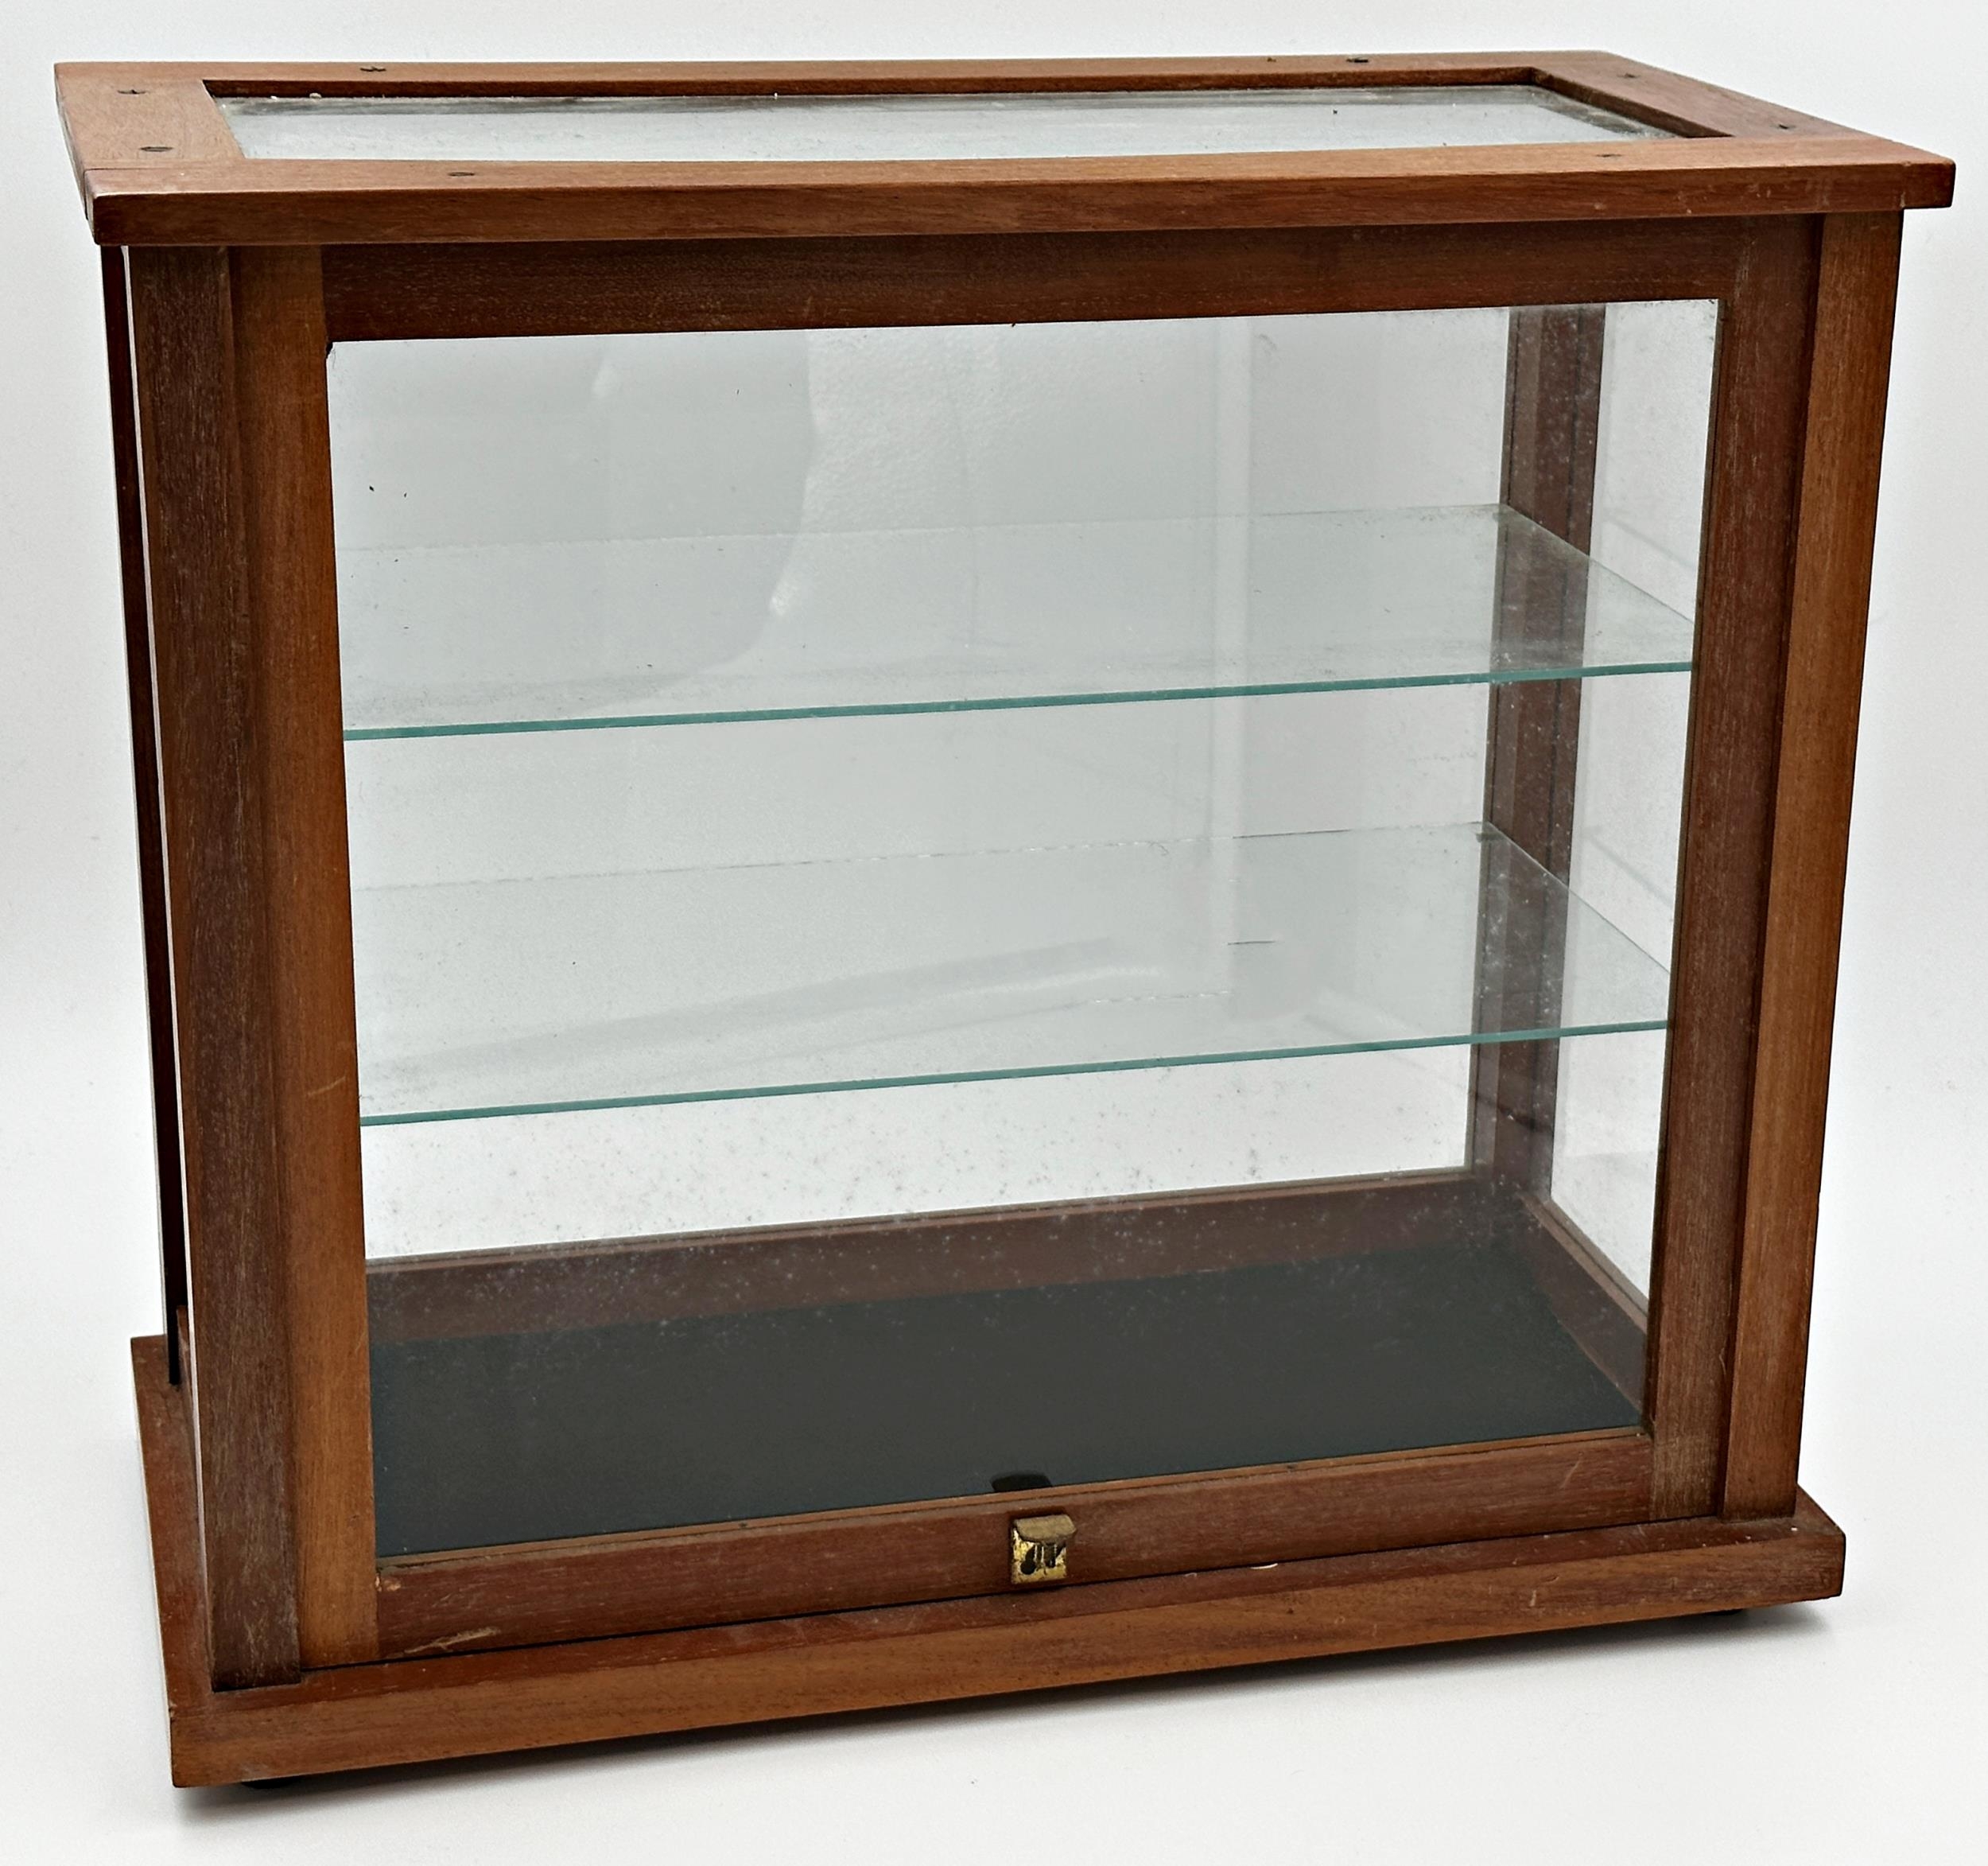 Table top teak framed display cabinet, with two glass shelves, 42cm high x 46cm wide